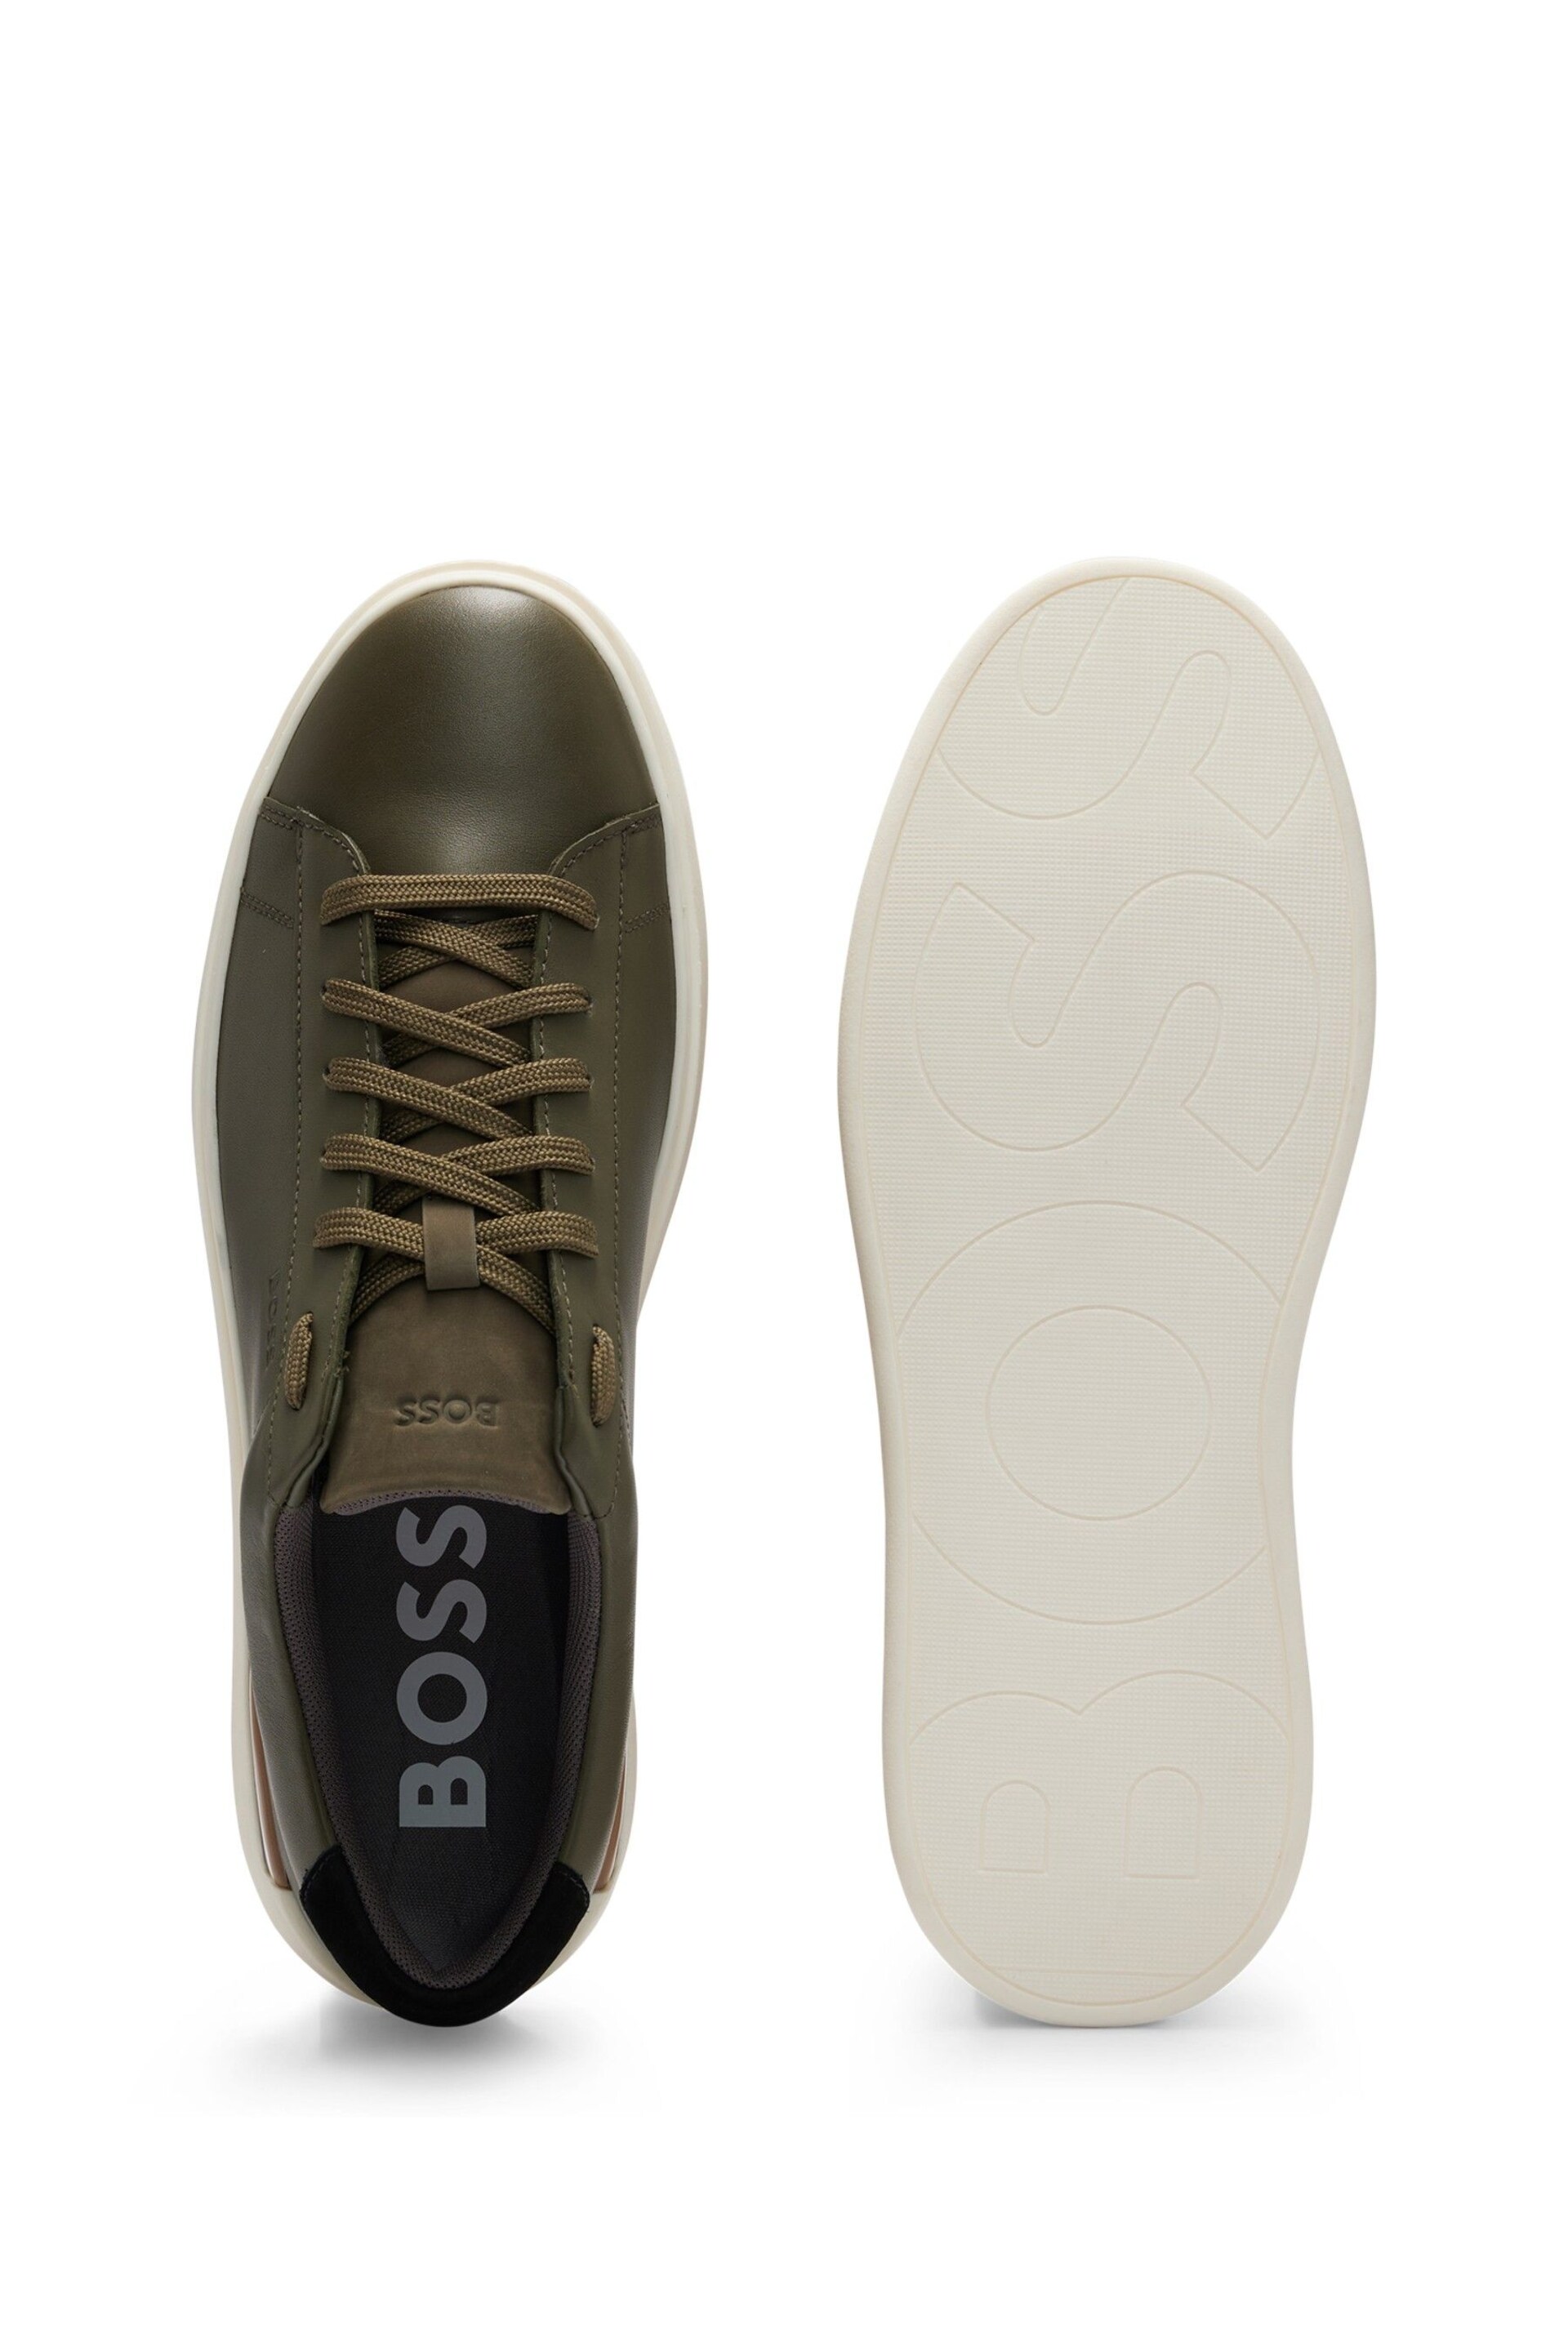 BOSS Green Clint Cupsole Lace Up Leather Trainers - Image 4 of 4